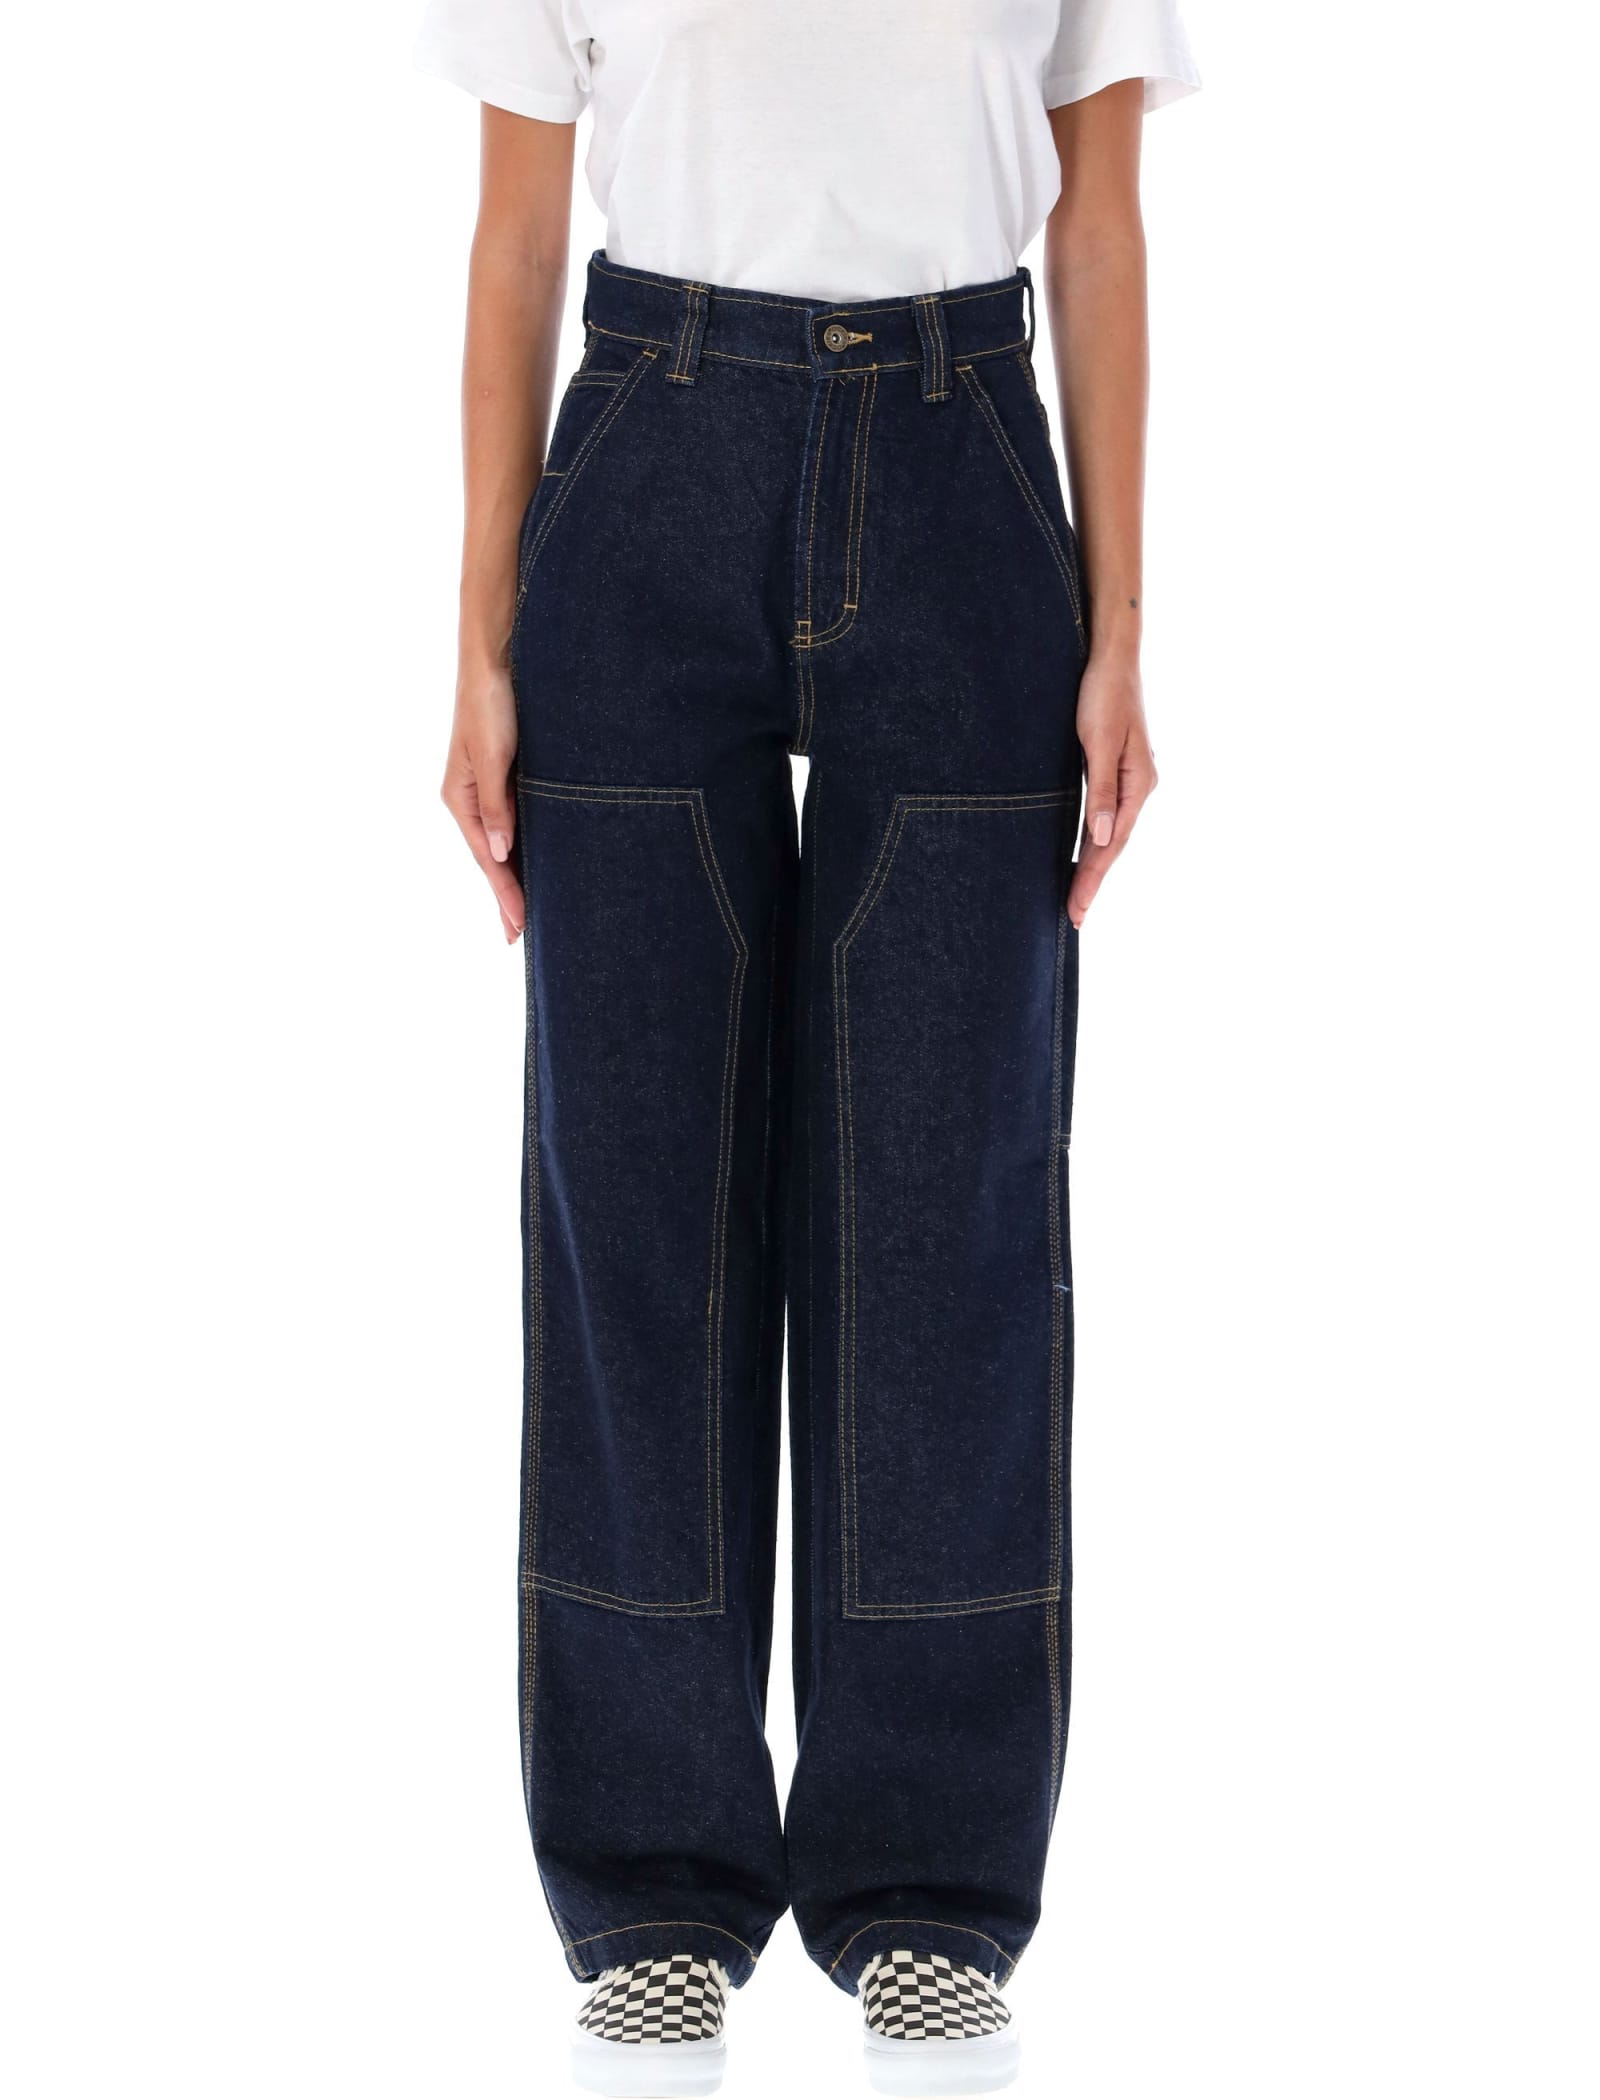 DICKIES MADISON DOUBLE KNEE JEANS